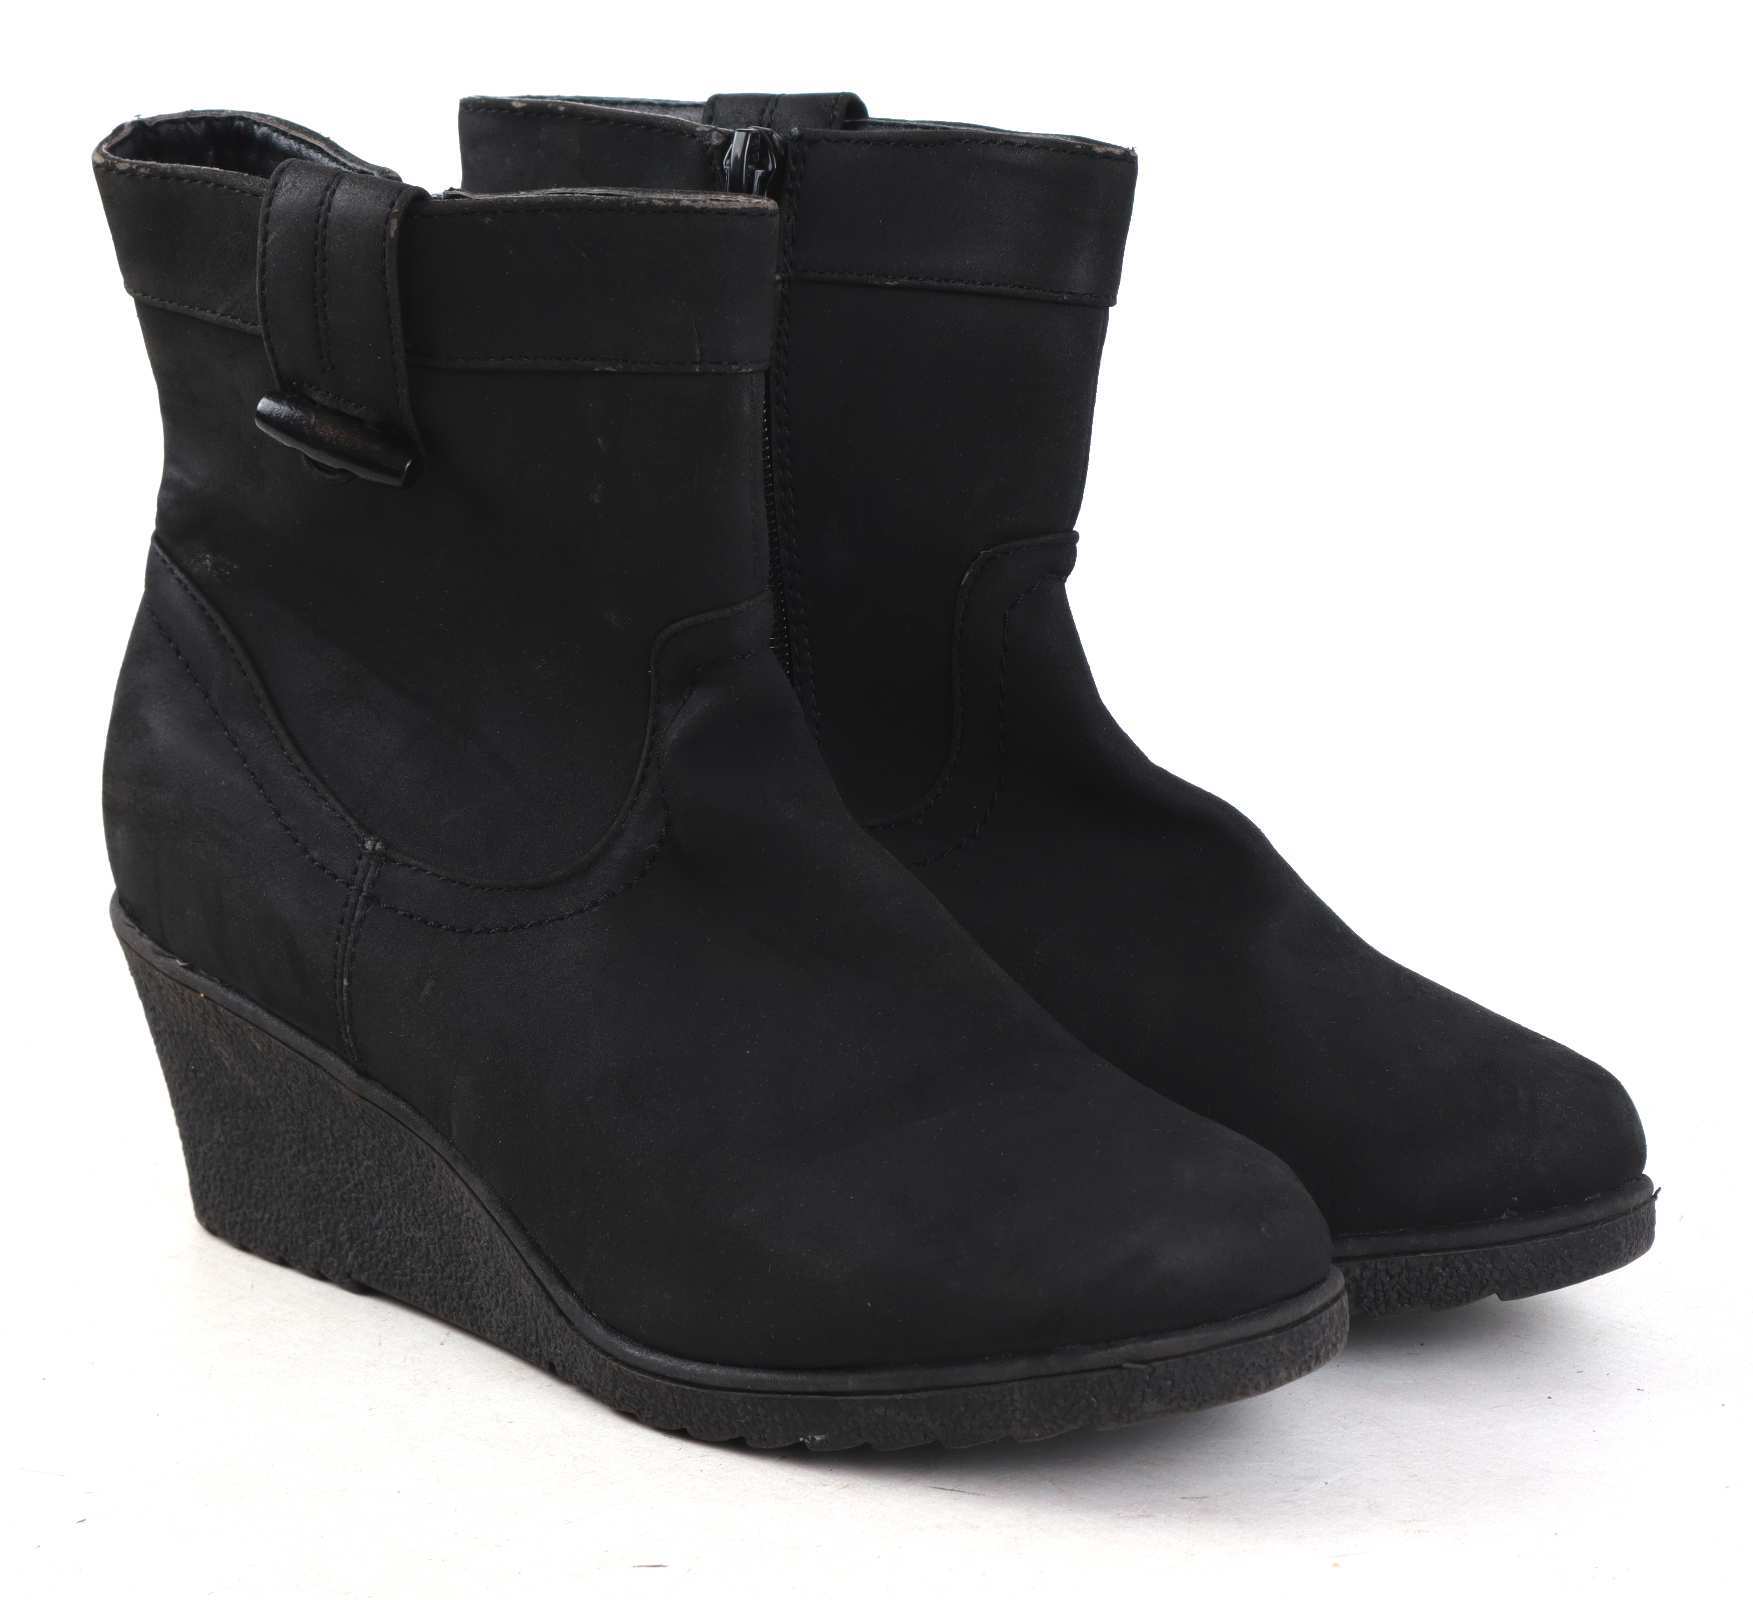 black ankle boots for women uk